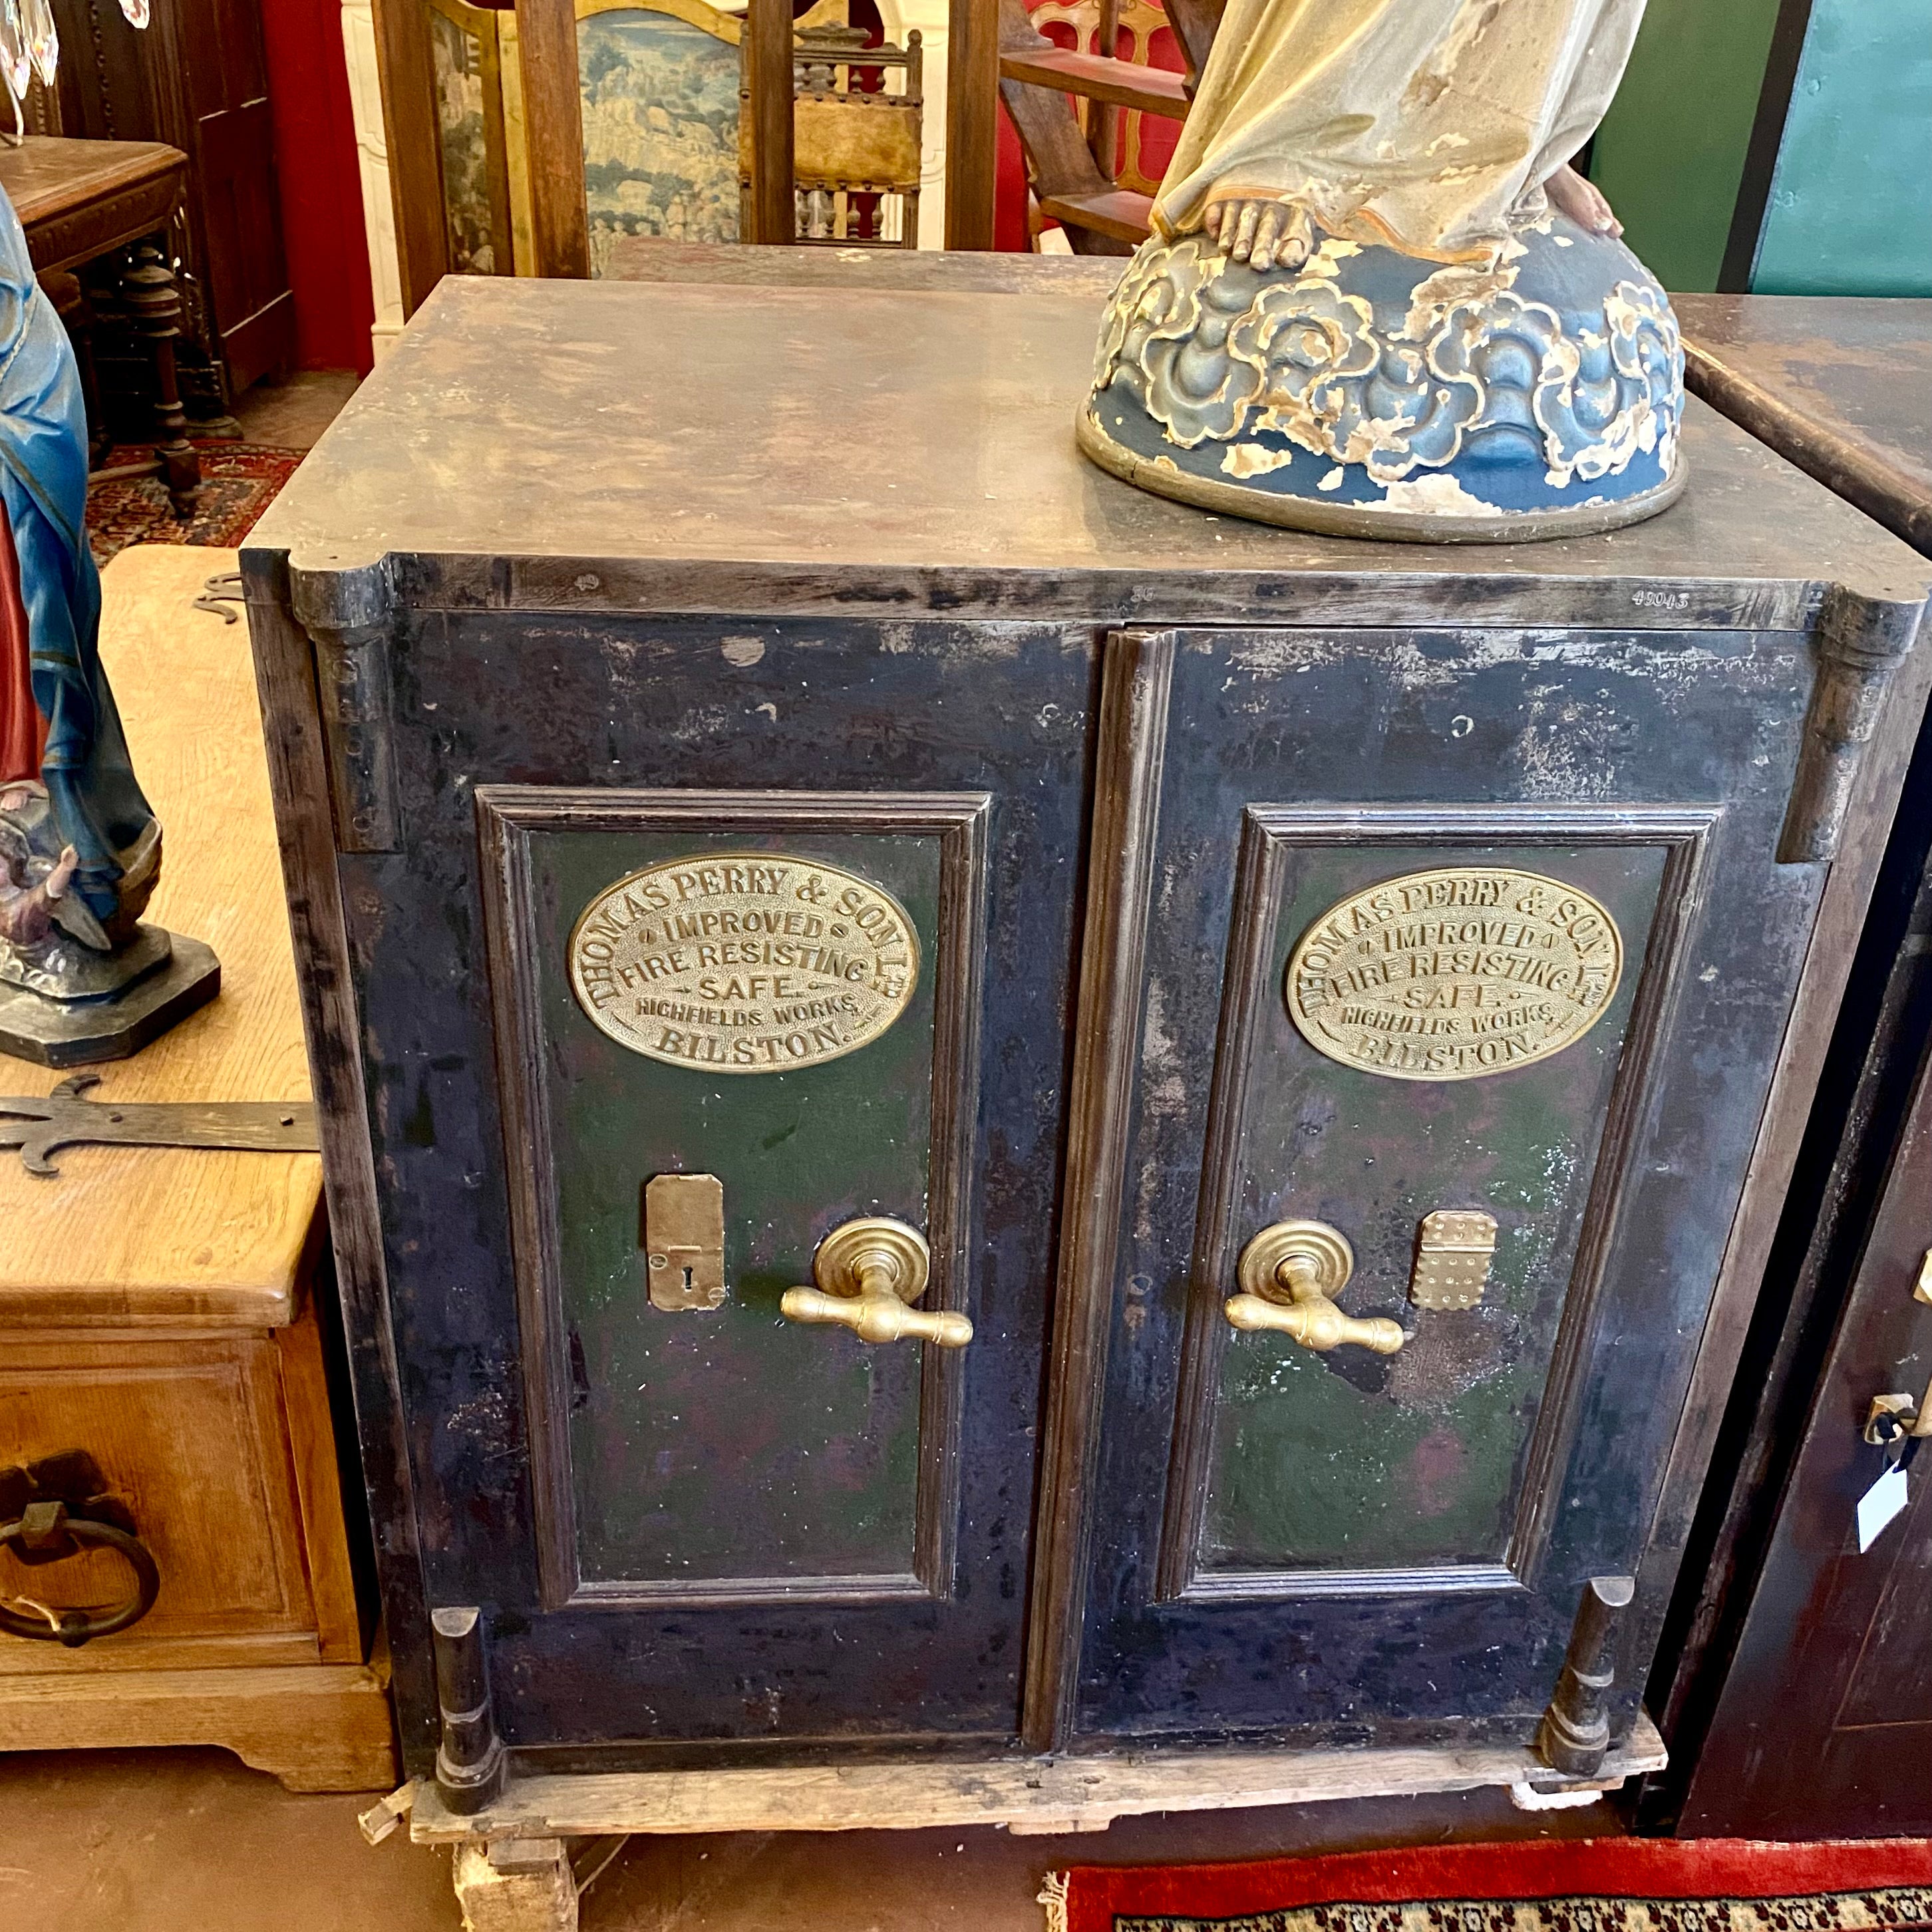 Very Rare and Special Double Door Safe by Thomas Perry and Sons